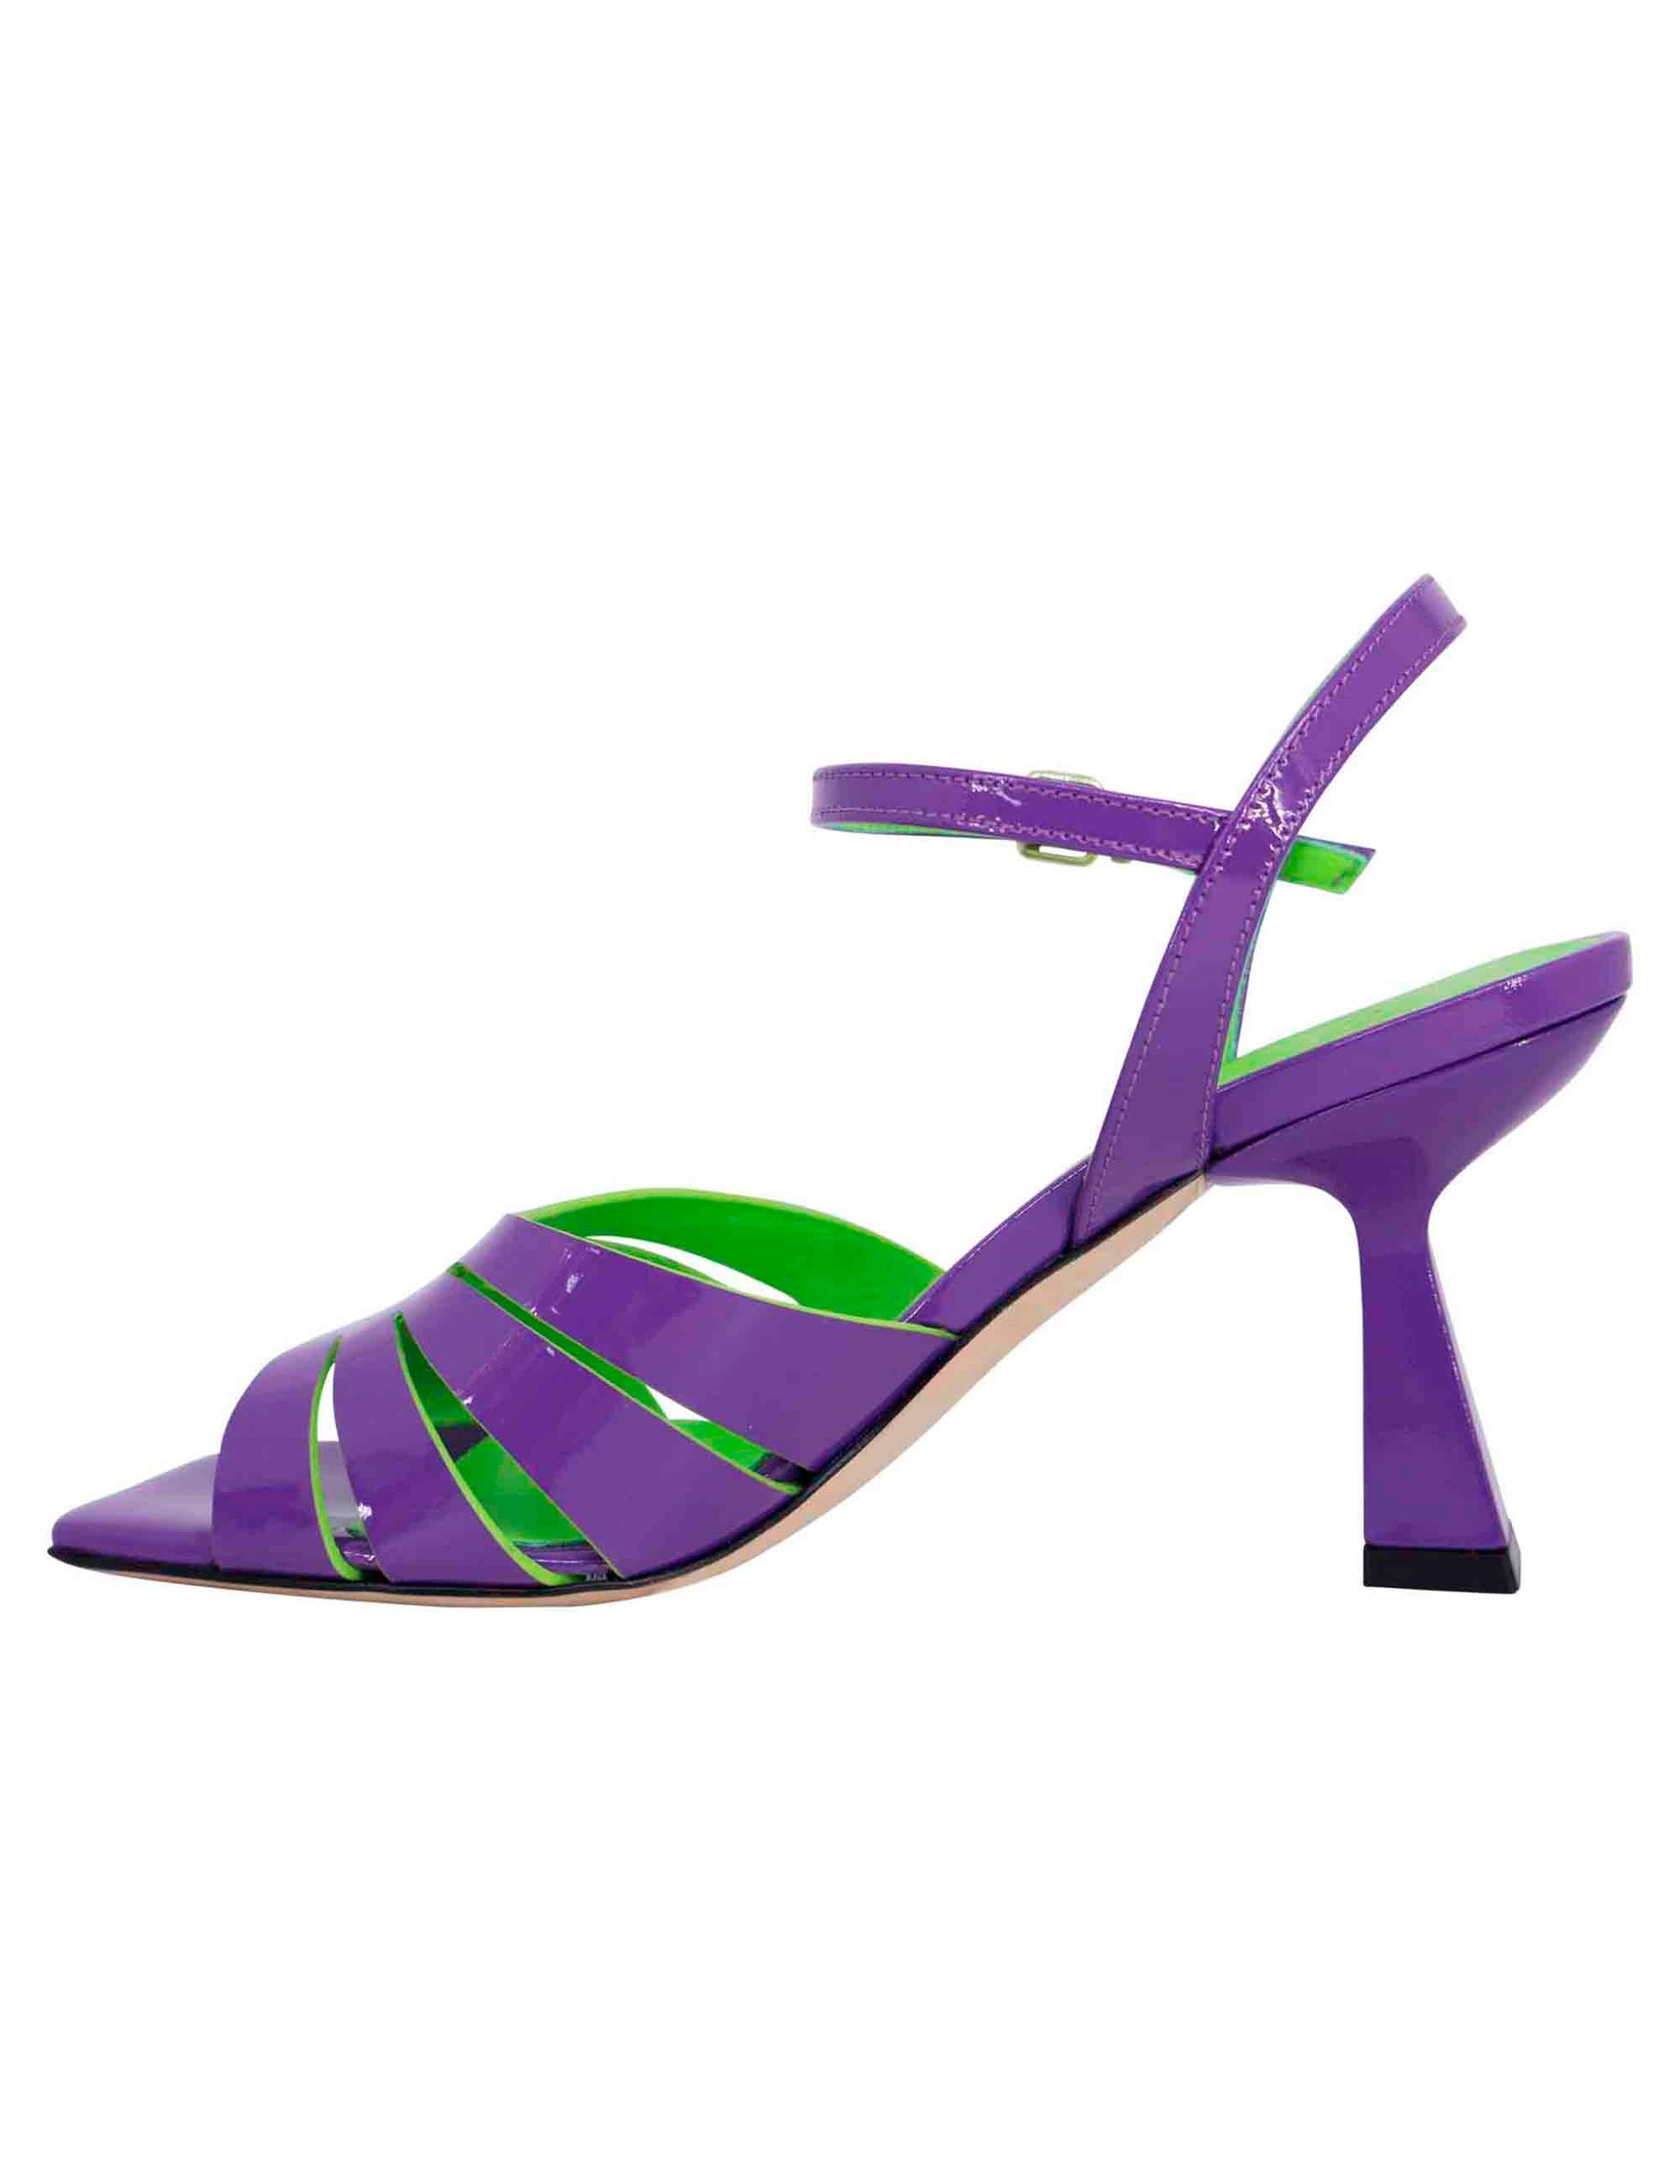 Women's purple patent leather sandals with high heel and ankle strap